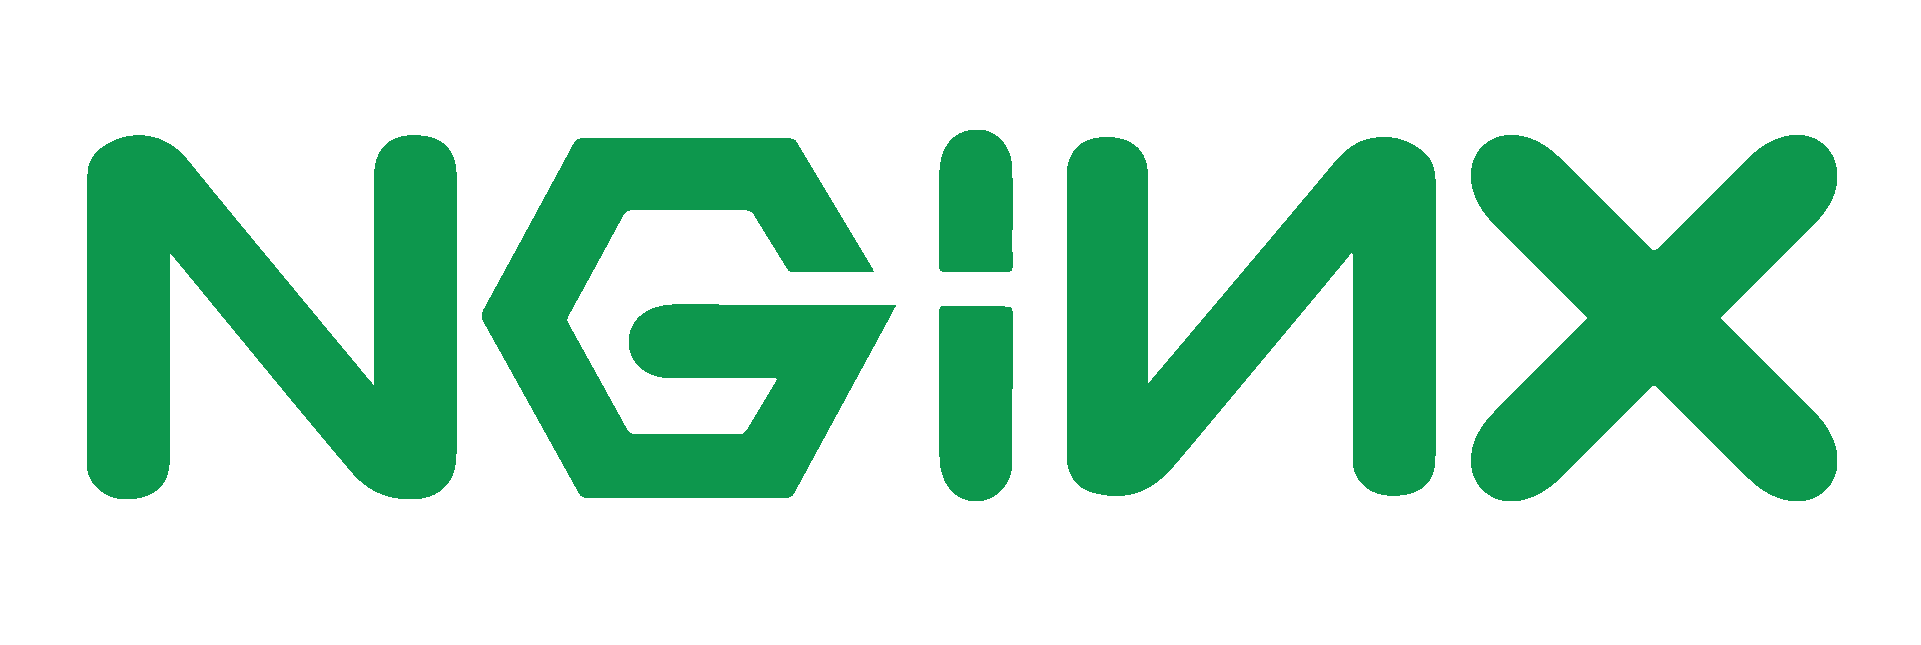 Enable GZIP Compression on nginx Servers